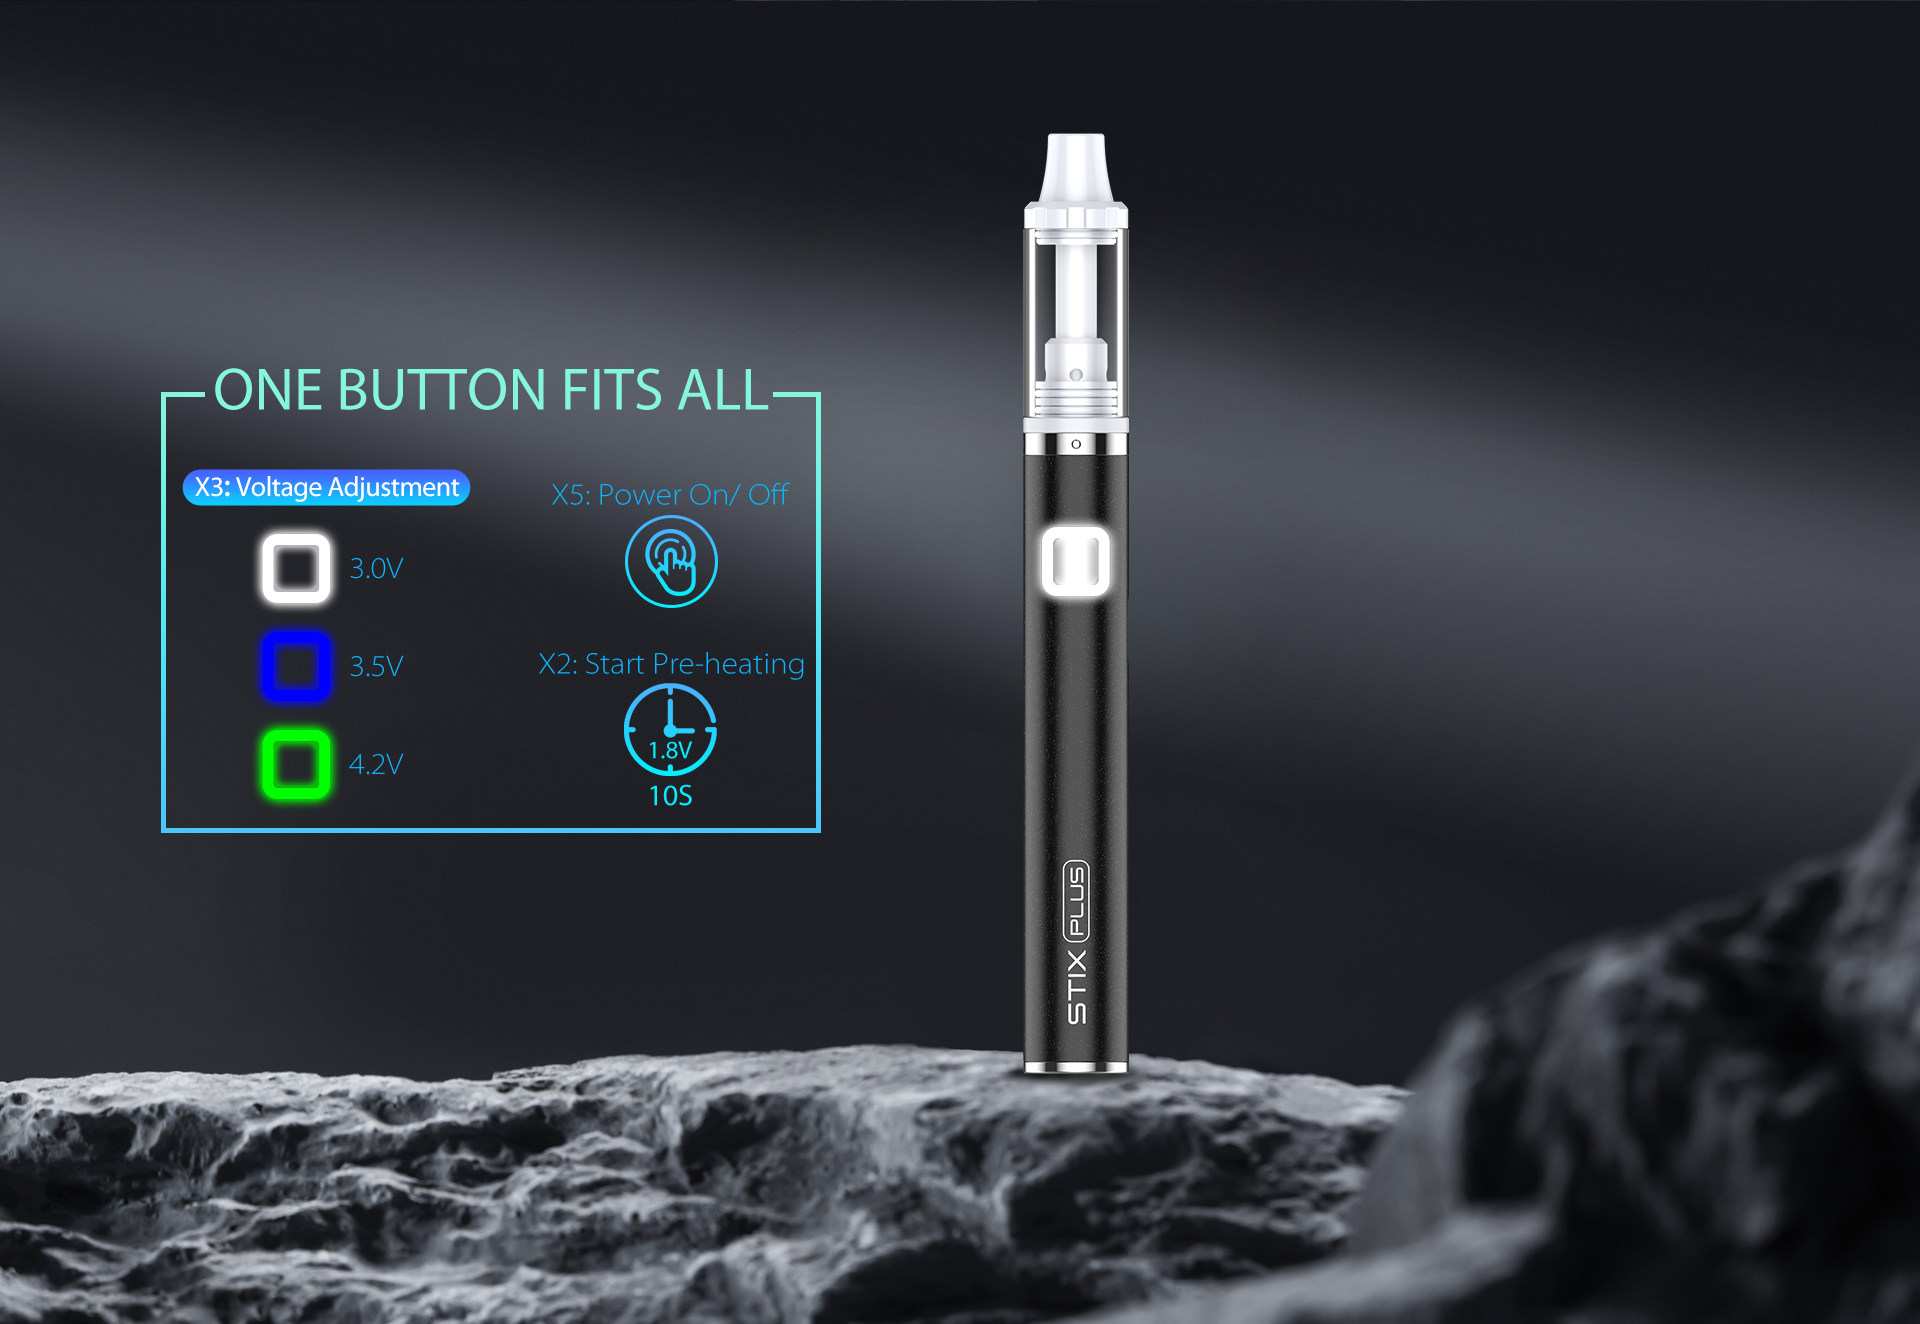 Yocan Stix Plus vape pen, one button realises the multiple functions of the device.